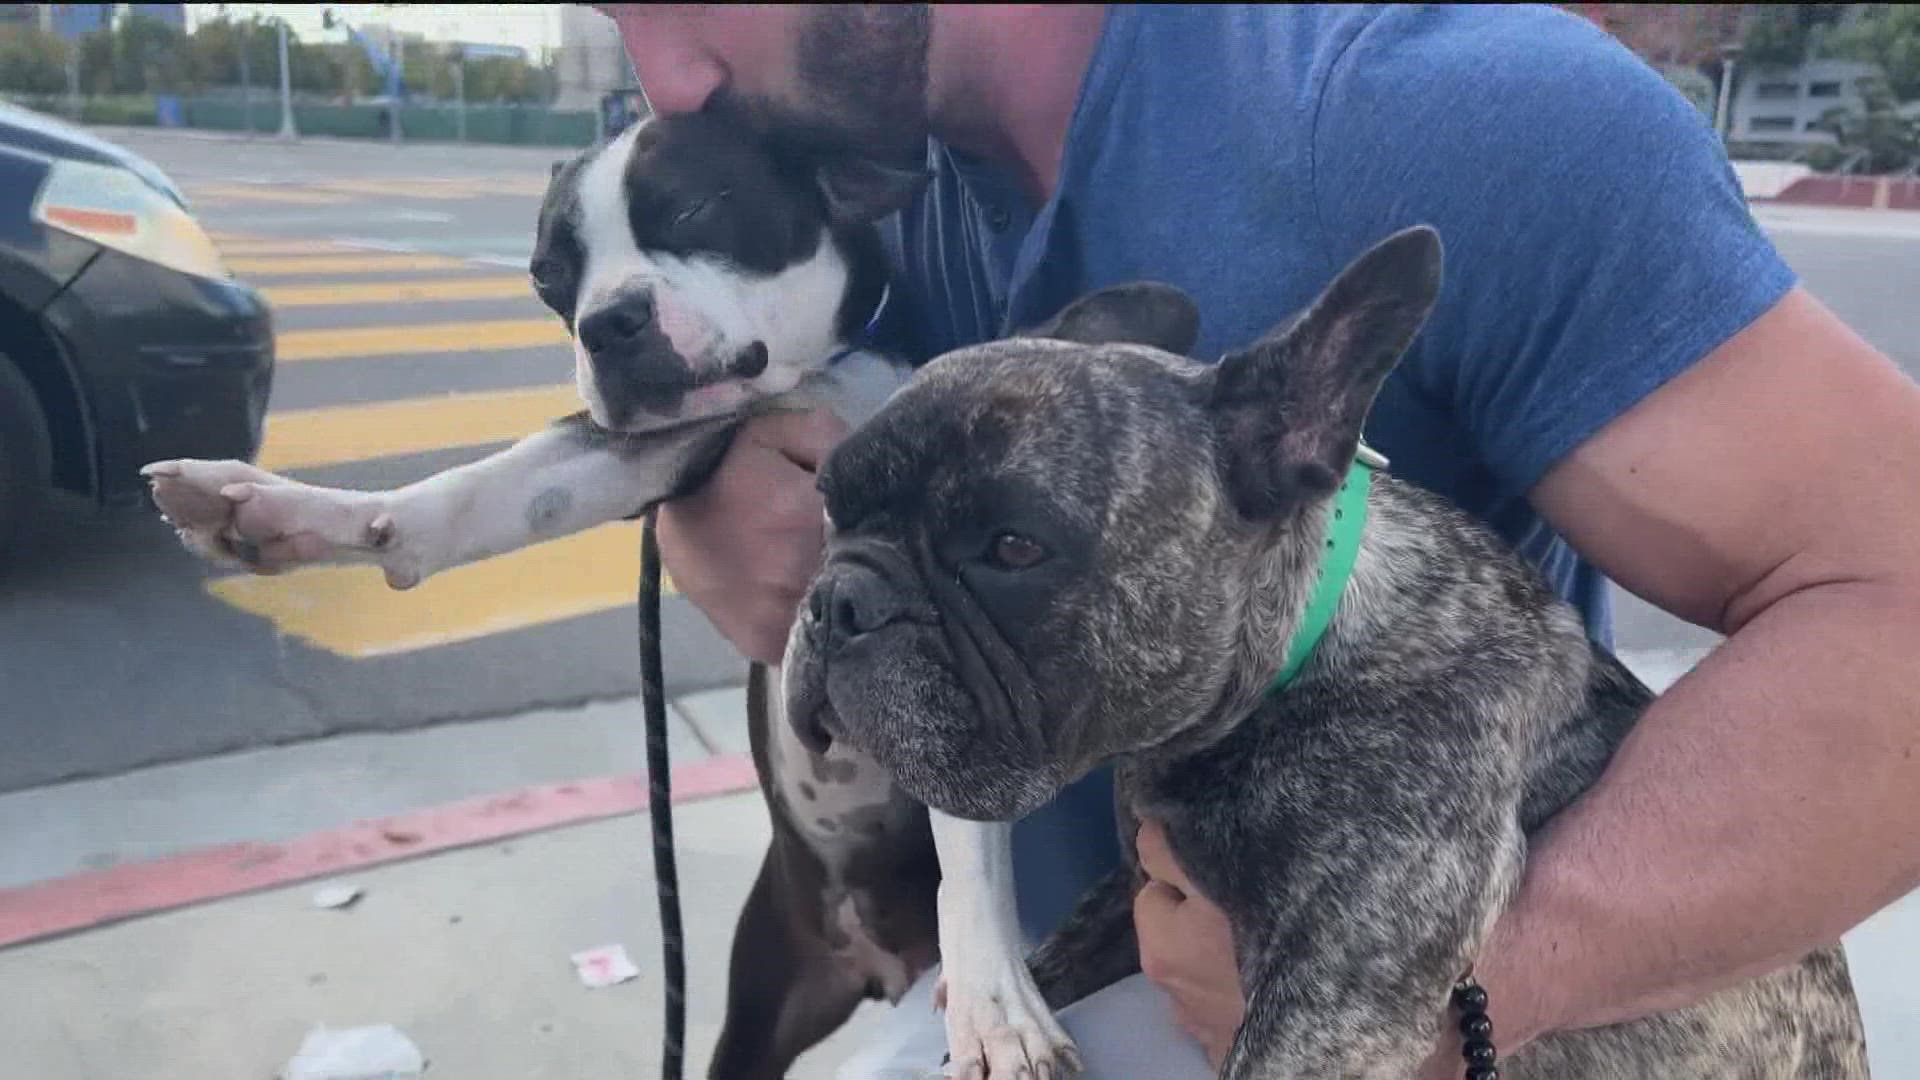 Frenchie “Winston Bolt” and Boston Terrier “Xena” were dognapped on December 6 in an auto-theft that happened outside Crunch Fitness in the El Cerrito neighborhood.